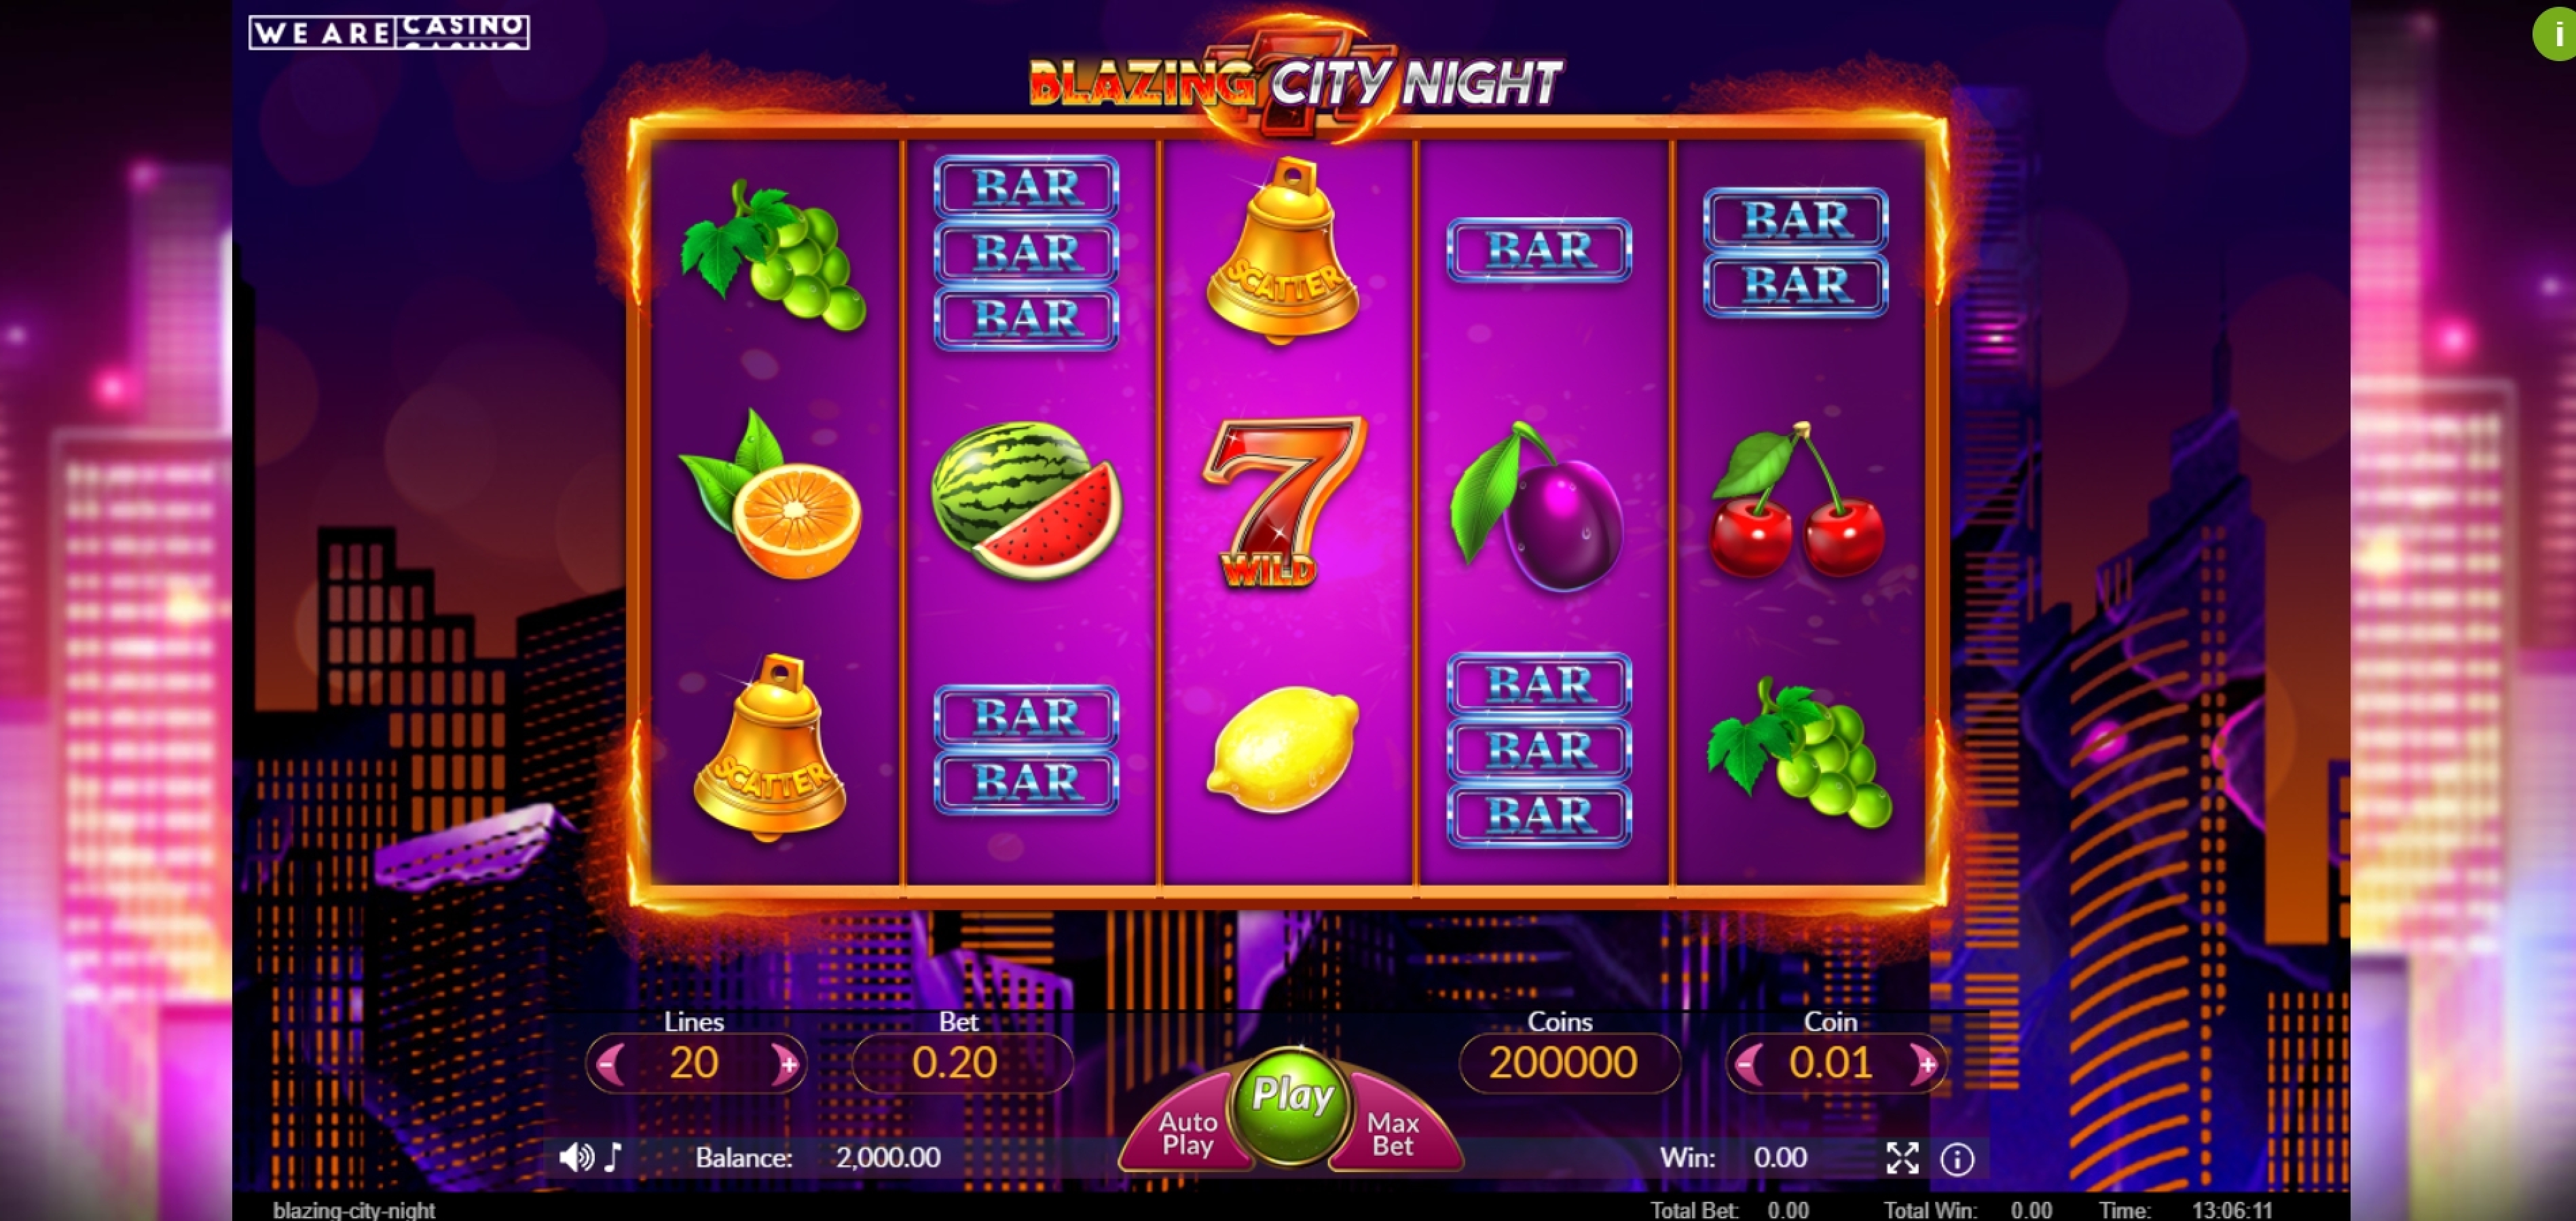 Reels in Blazing City Night Slot Game by We Are Casino